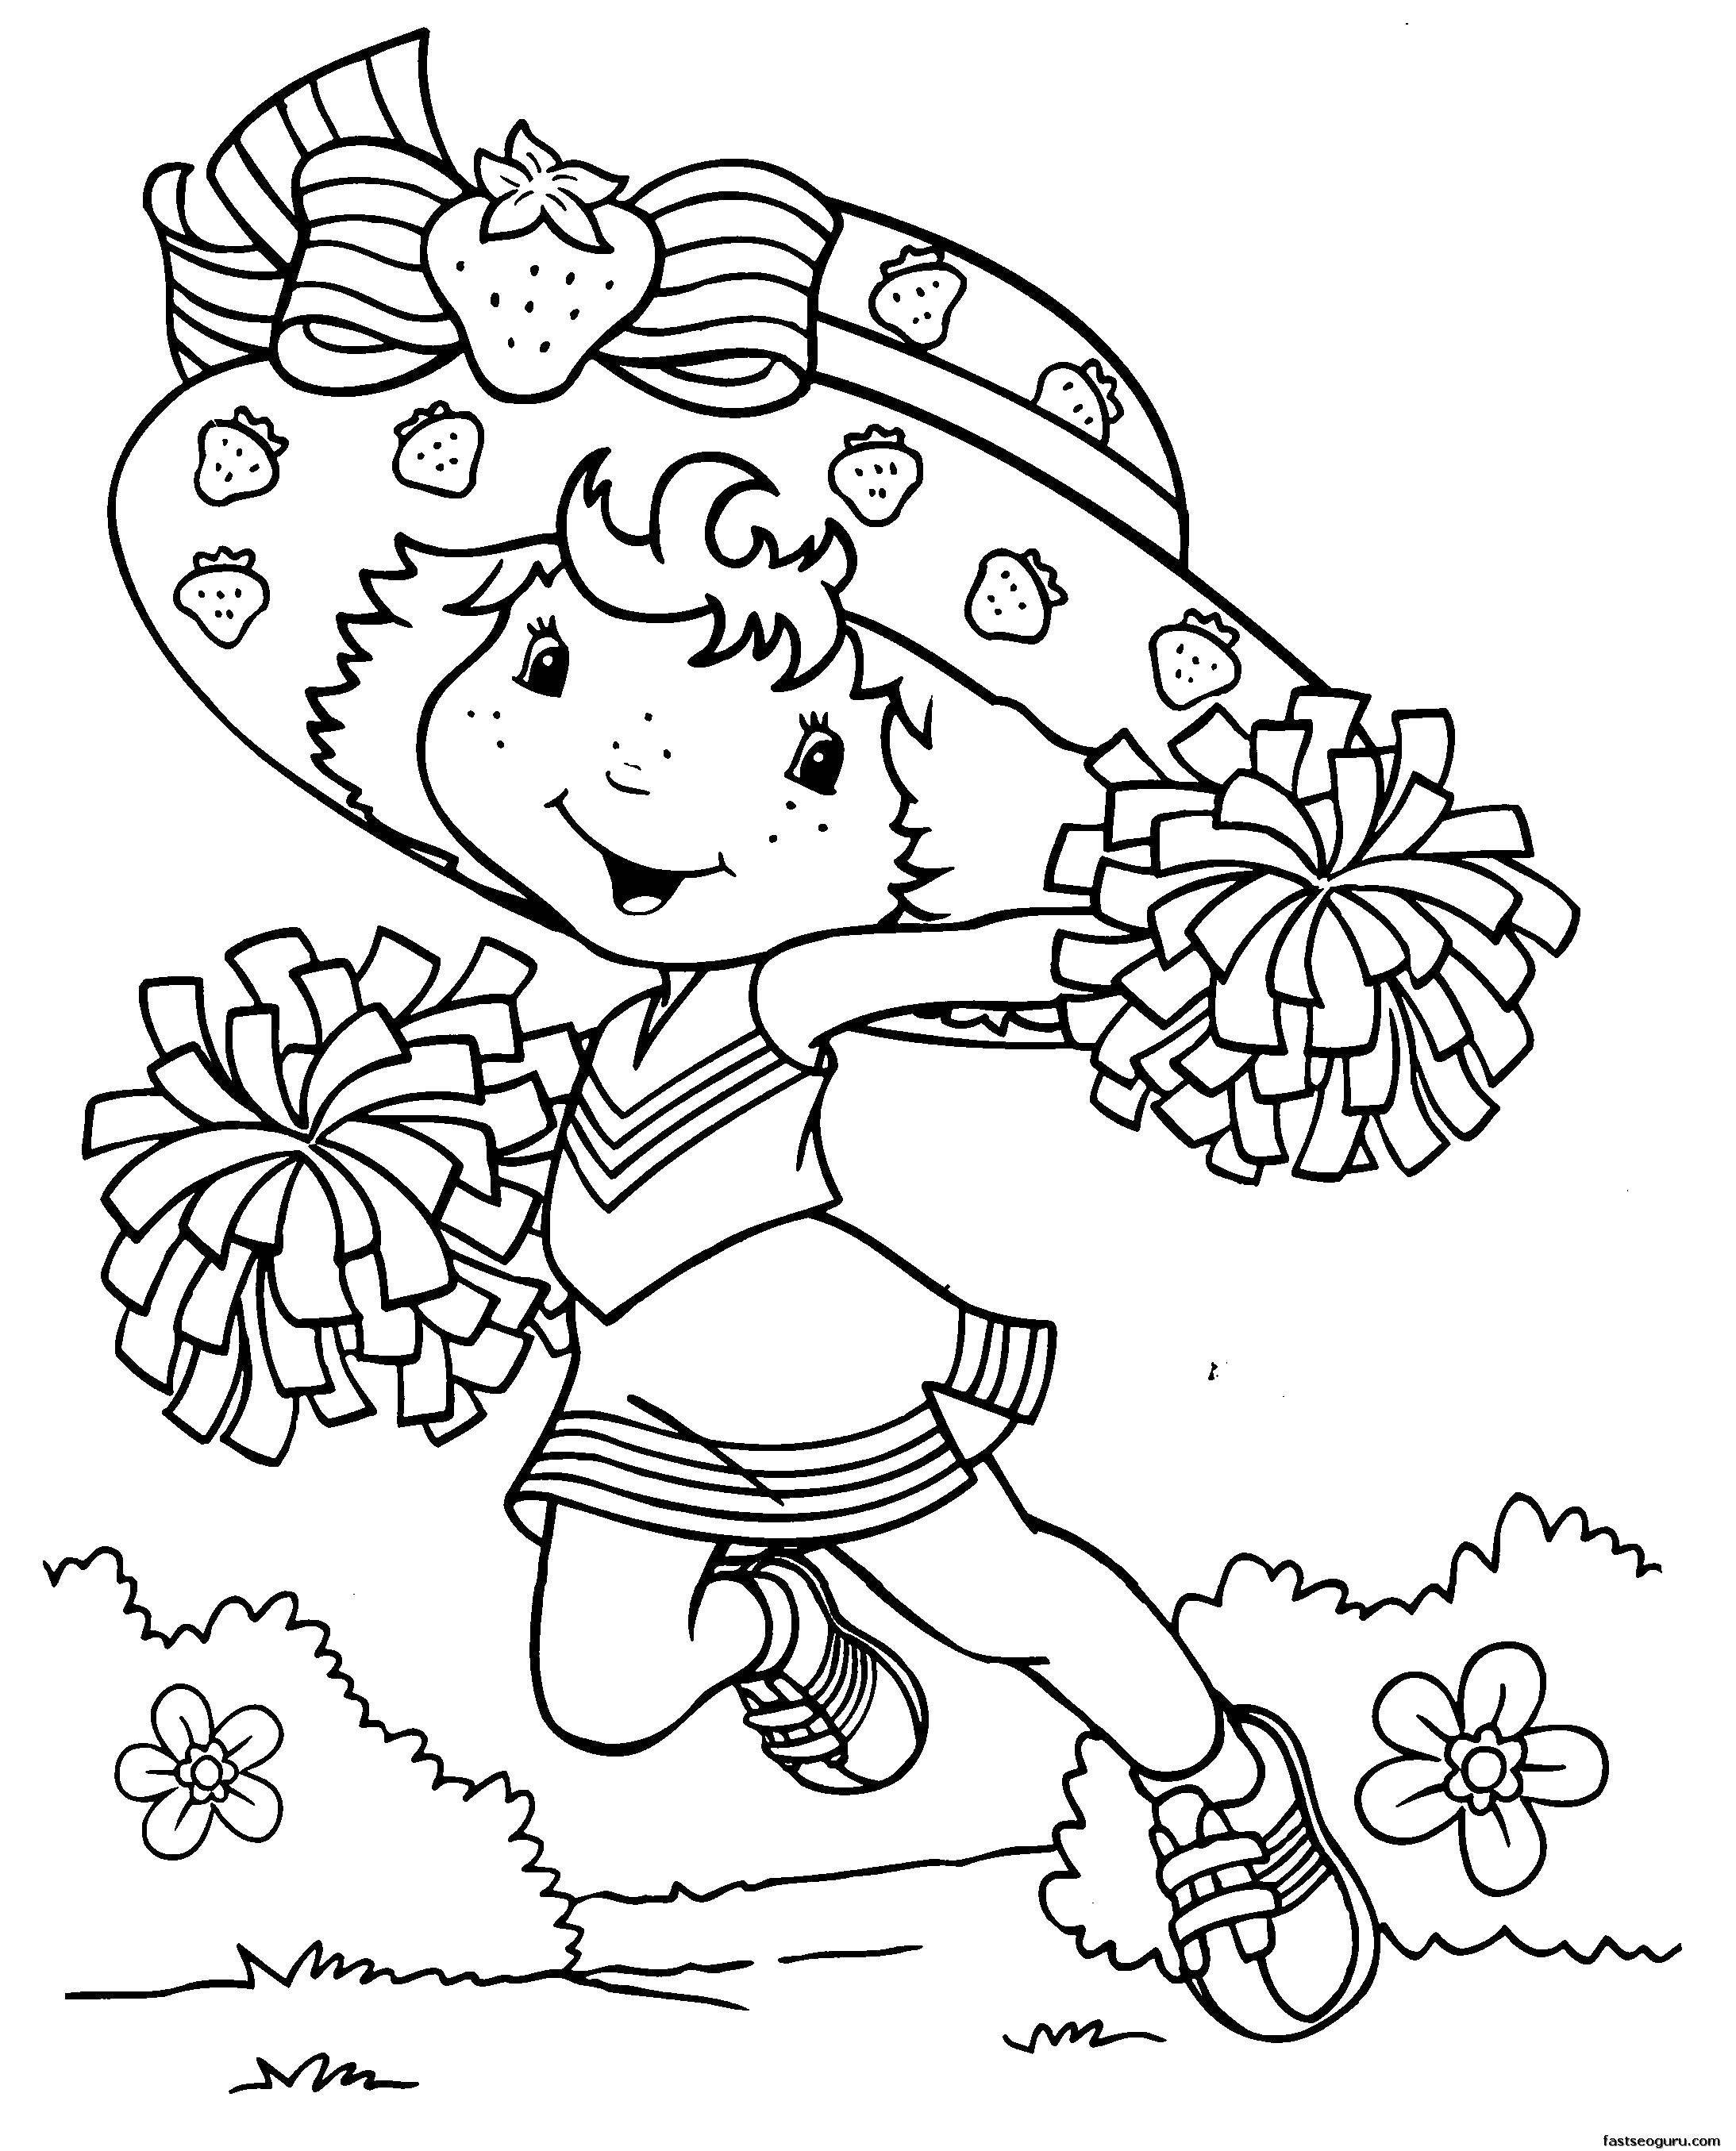 Coloring The girl from the support group. Category For girls. Tags:  Girl , joy, fun.